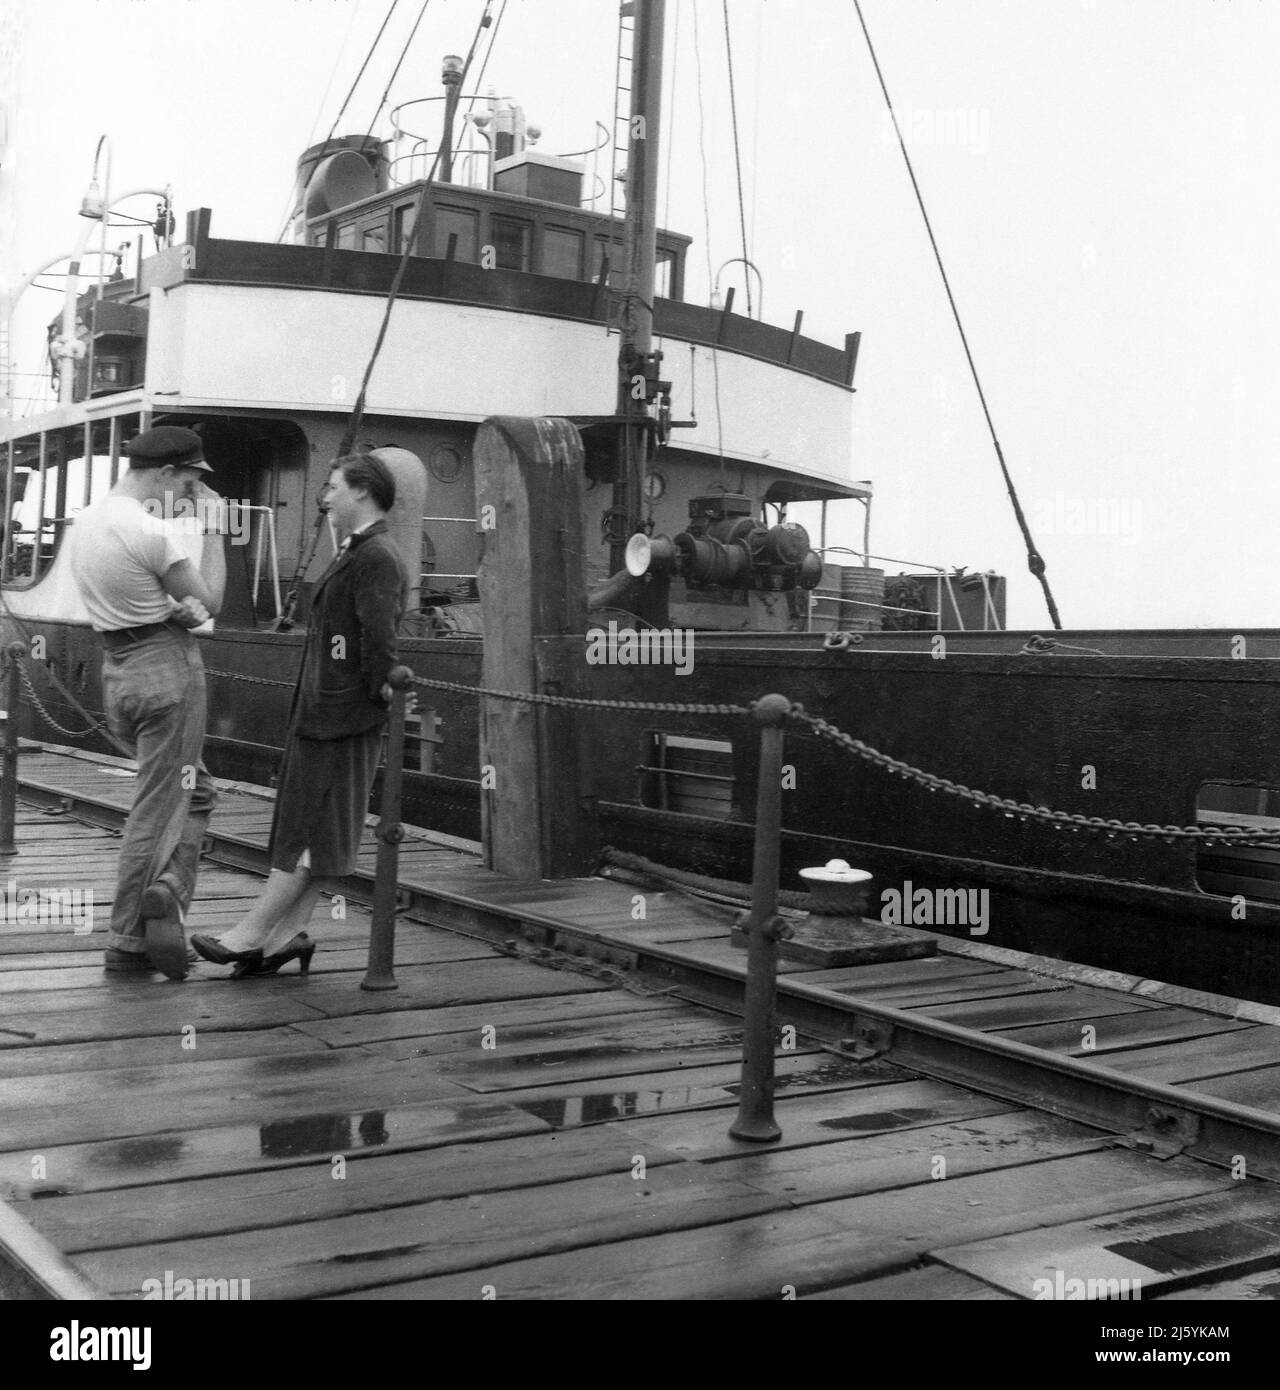 1960, historical, standing on a wet wooden quay, a young male sailor in t-shirt and cap talking to a young woman, Birkenhead Docks, Mersey, Liverpool, England, UK. The cargo ship, Seatern is moored up. Stock Photo